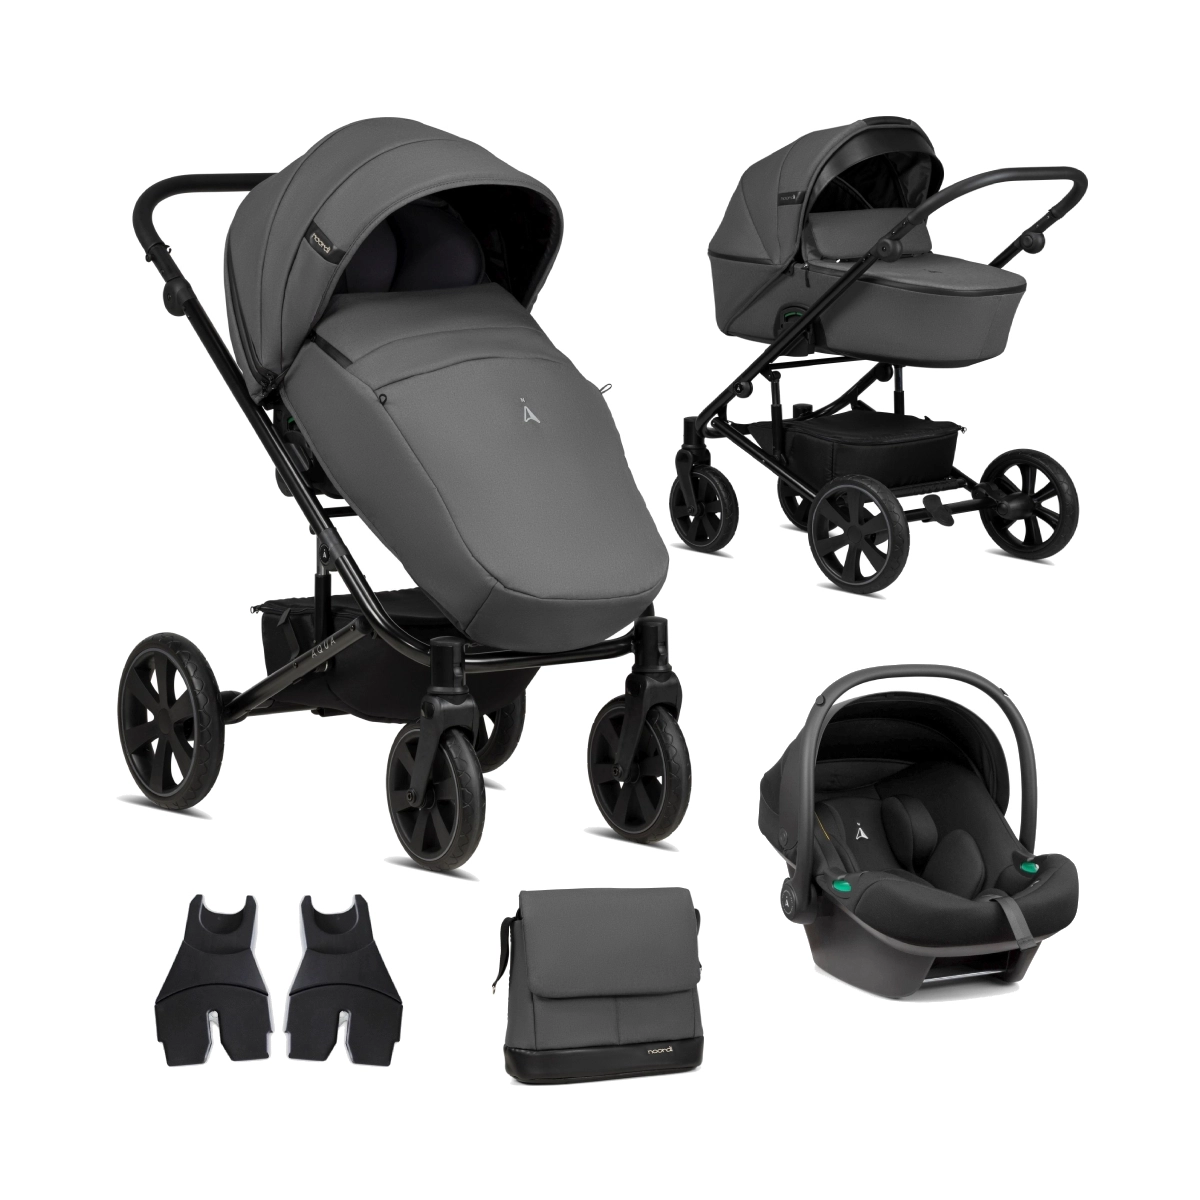 Noordi Aqua Thermo 3in1 Travel System with Terra i-Size Car Seat